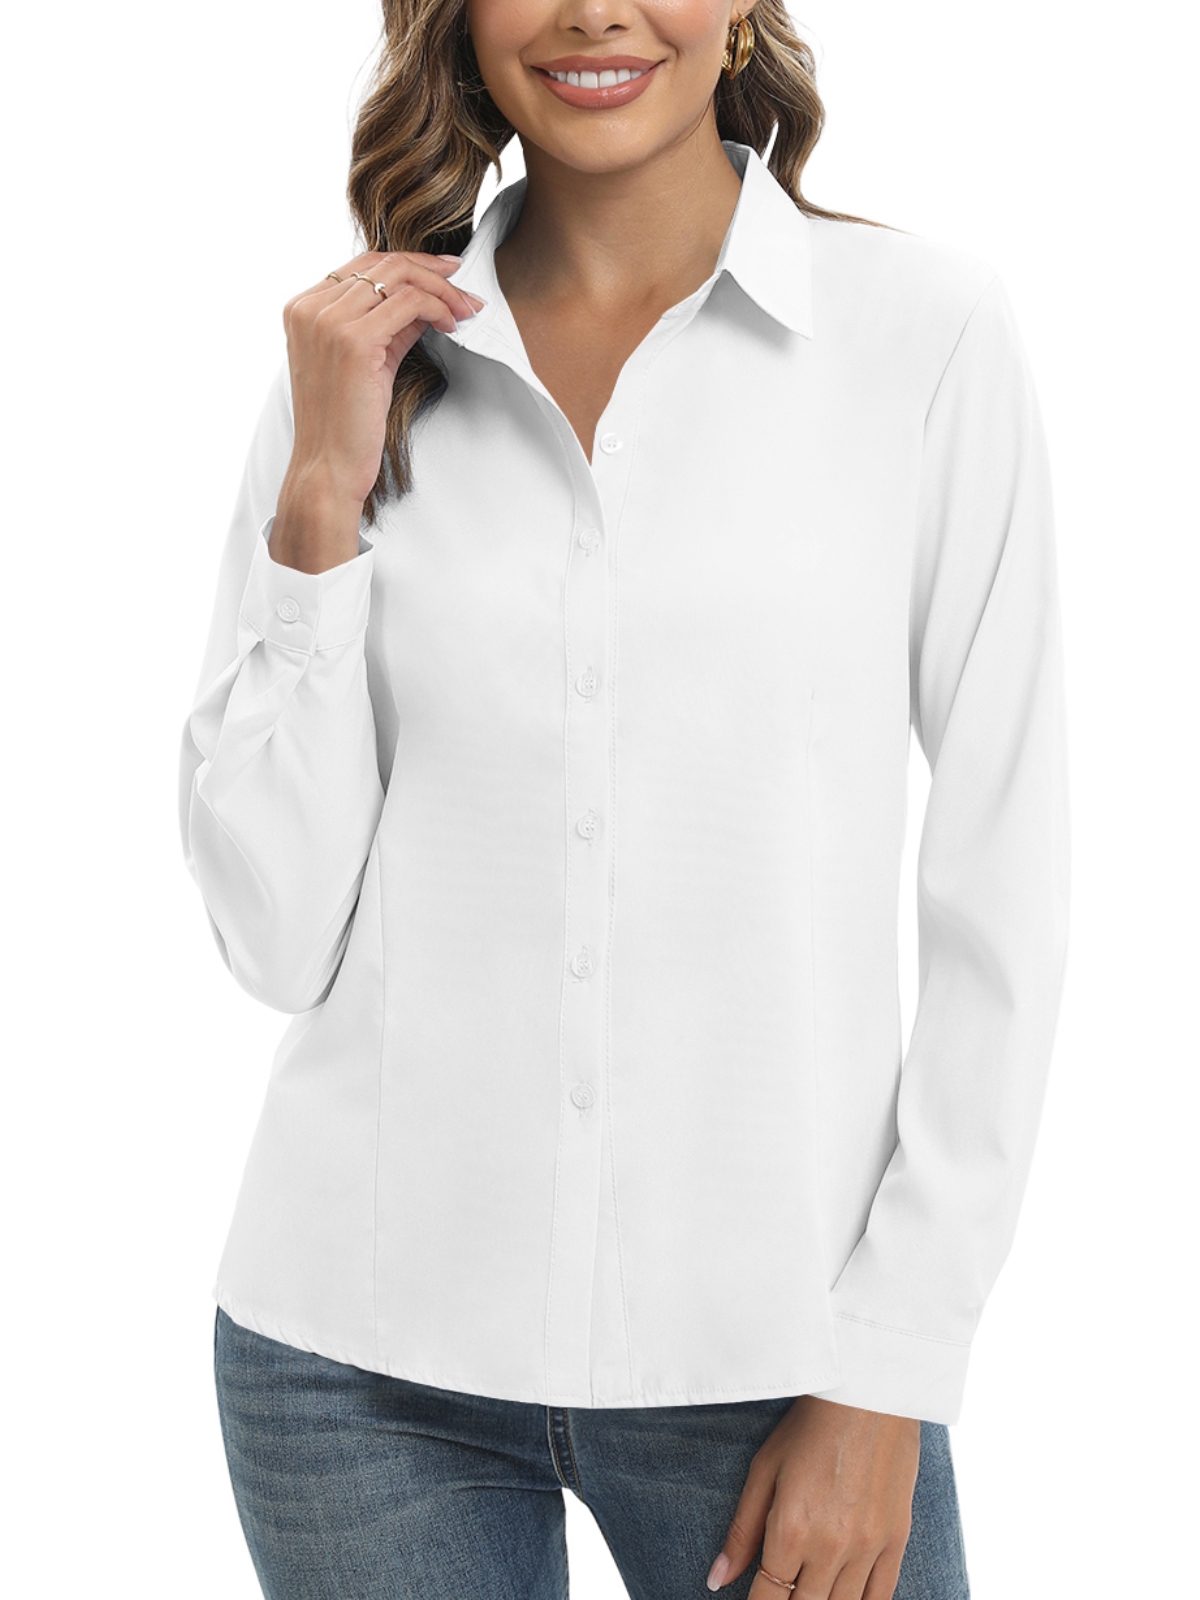 EFINNY Button Down Shirts for Women Long Sleeve Office Casual Business ...